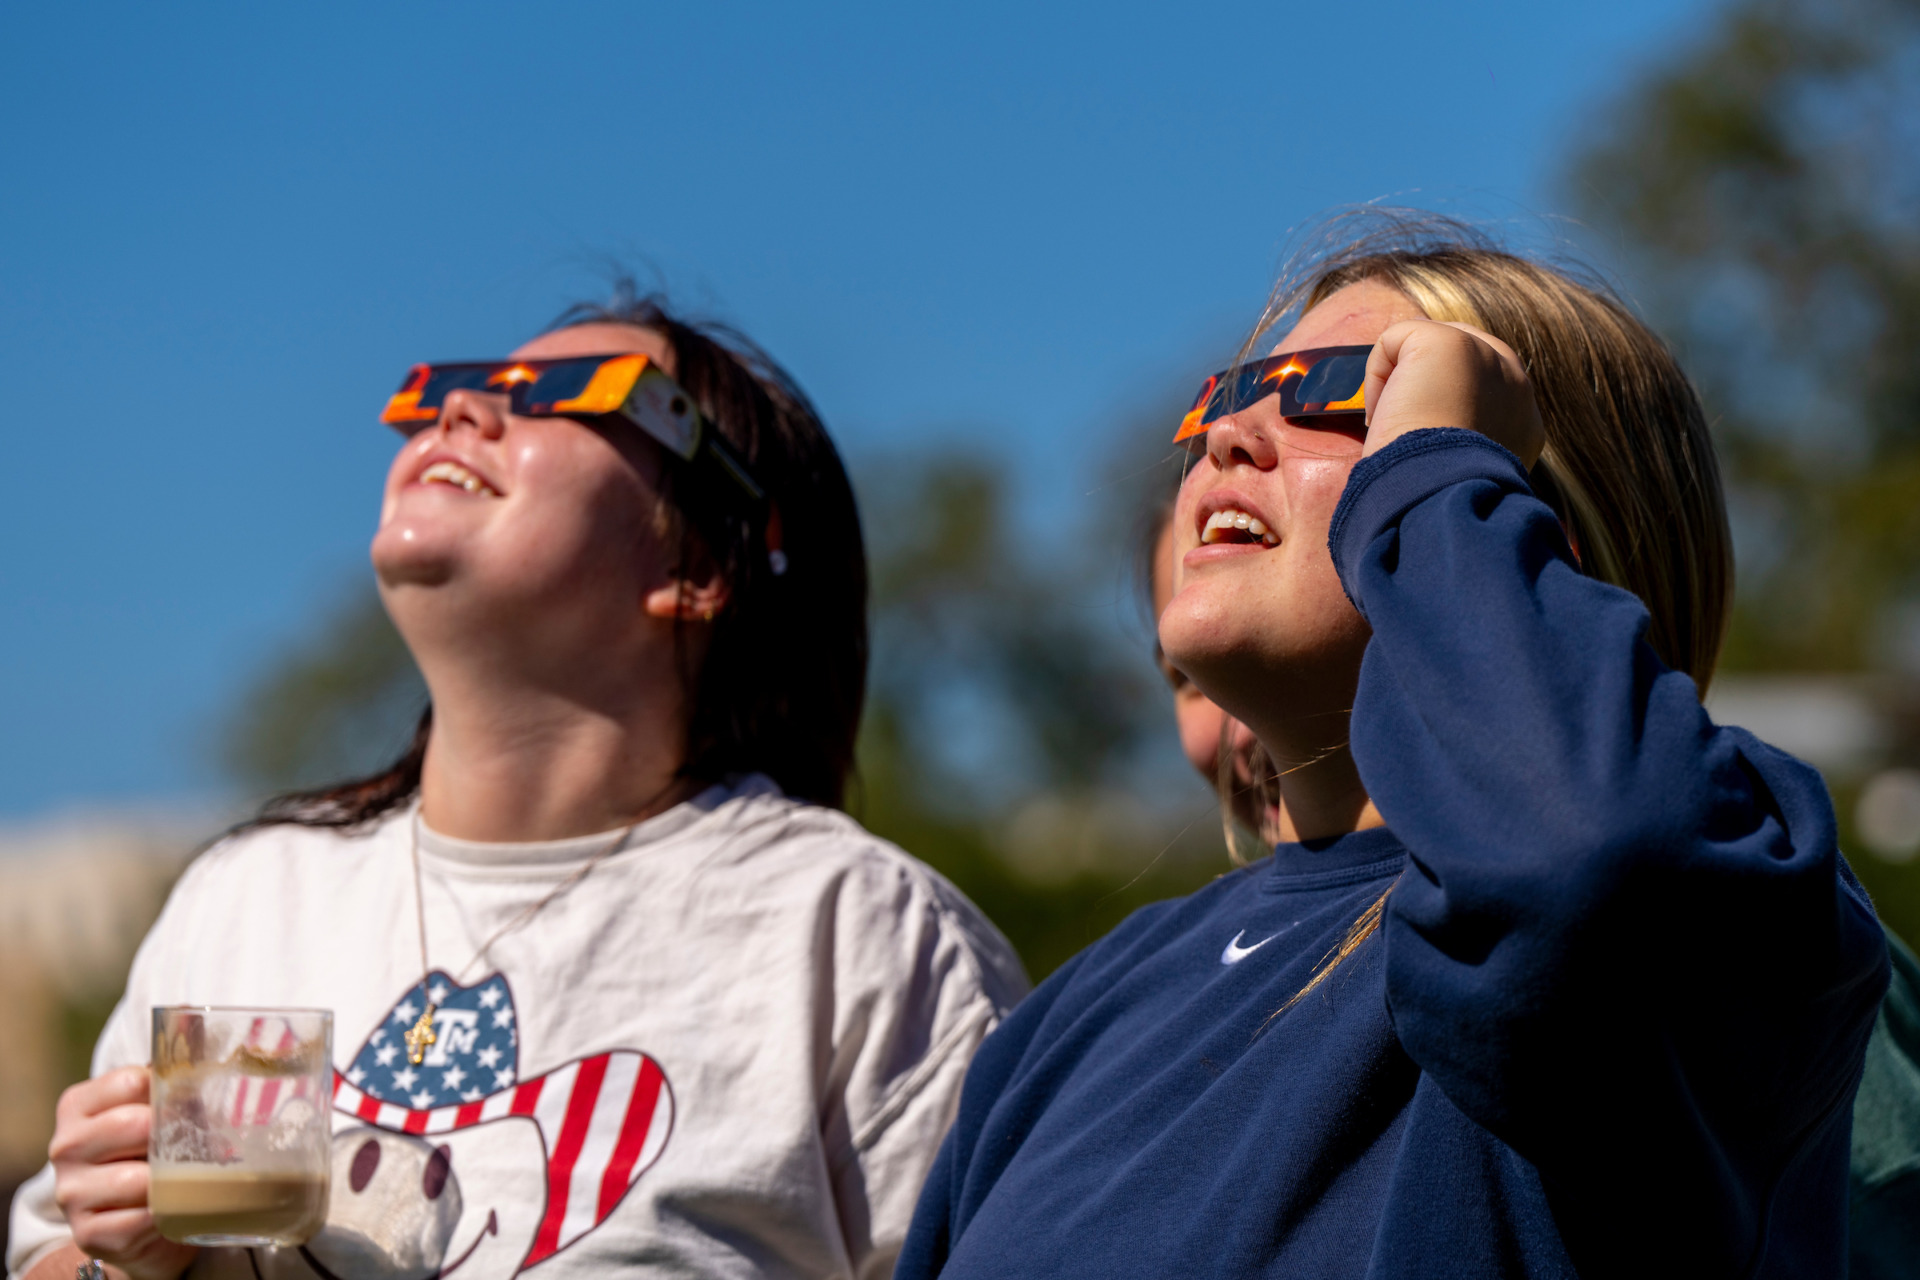 Safety tips for watching solar eclipse in Texas